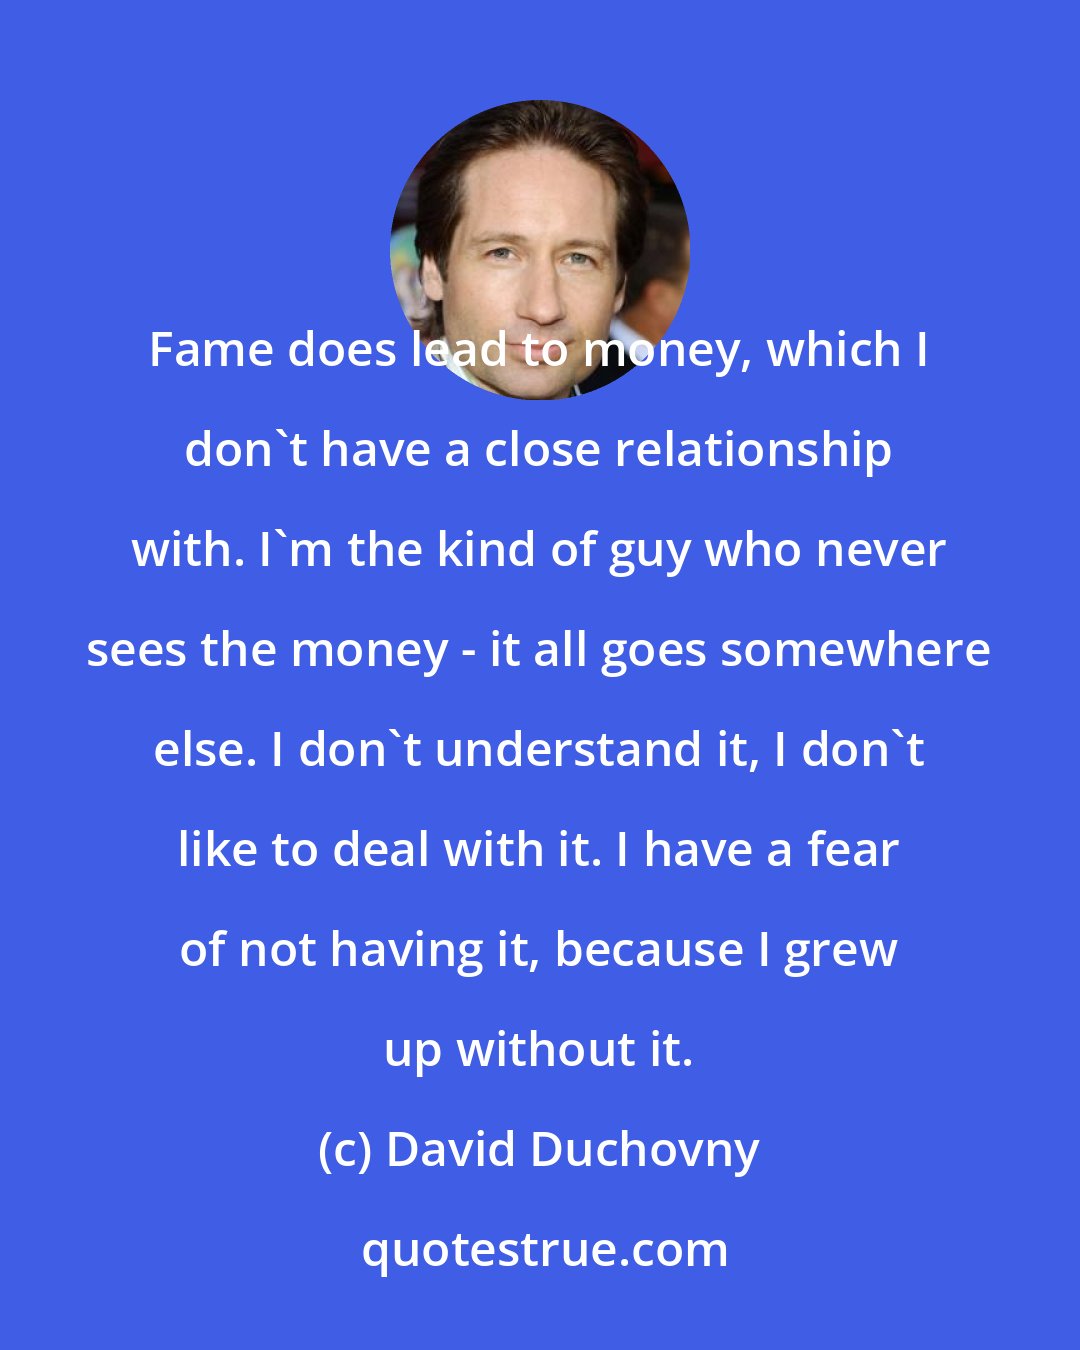 David Duchovny: Fame does lead to money, which I don't have a close relationship with. I'm the kind of guy who never sees the money - it all goes somewhere else. I don't understand it, I don't like to deal with it. I have a fear of not having it, because I grew up without it.